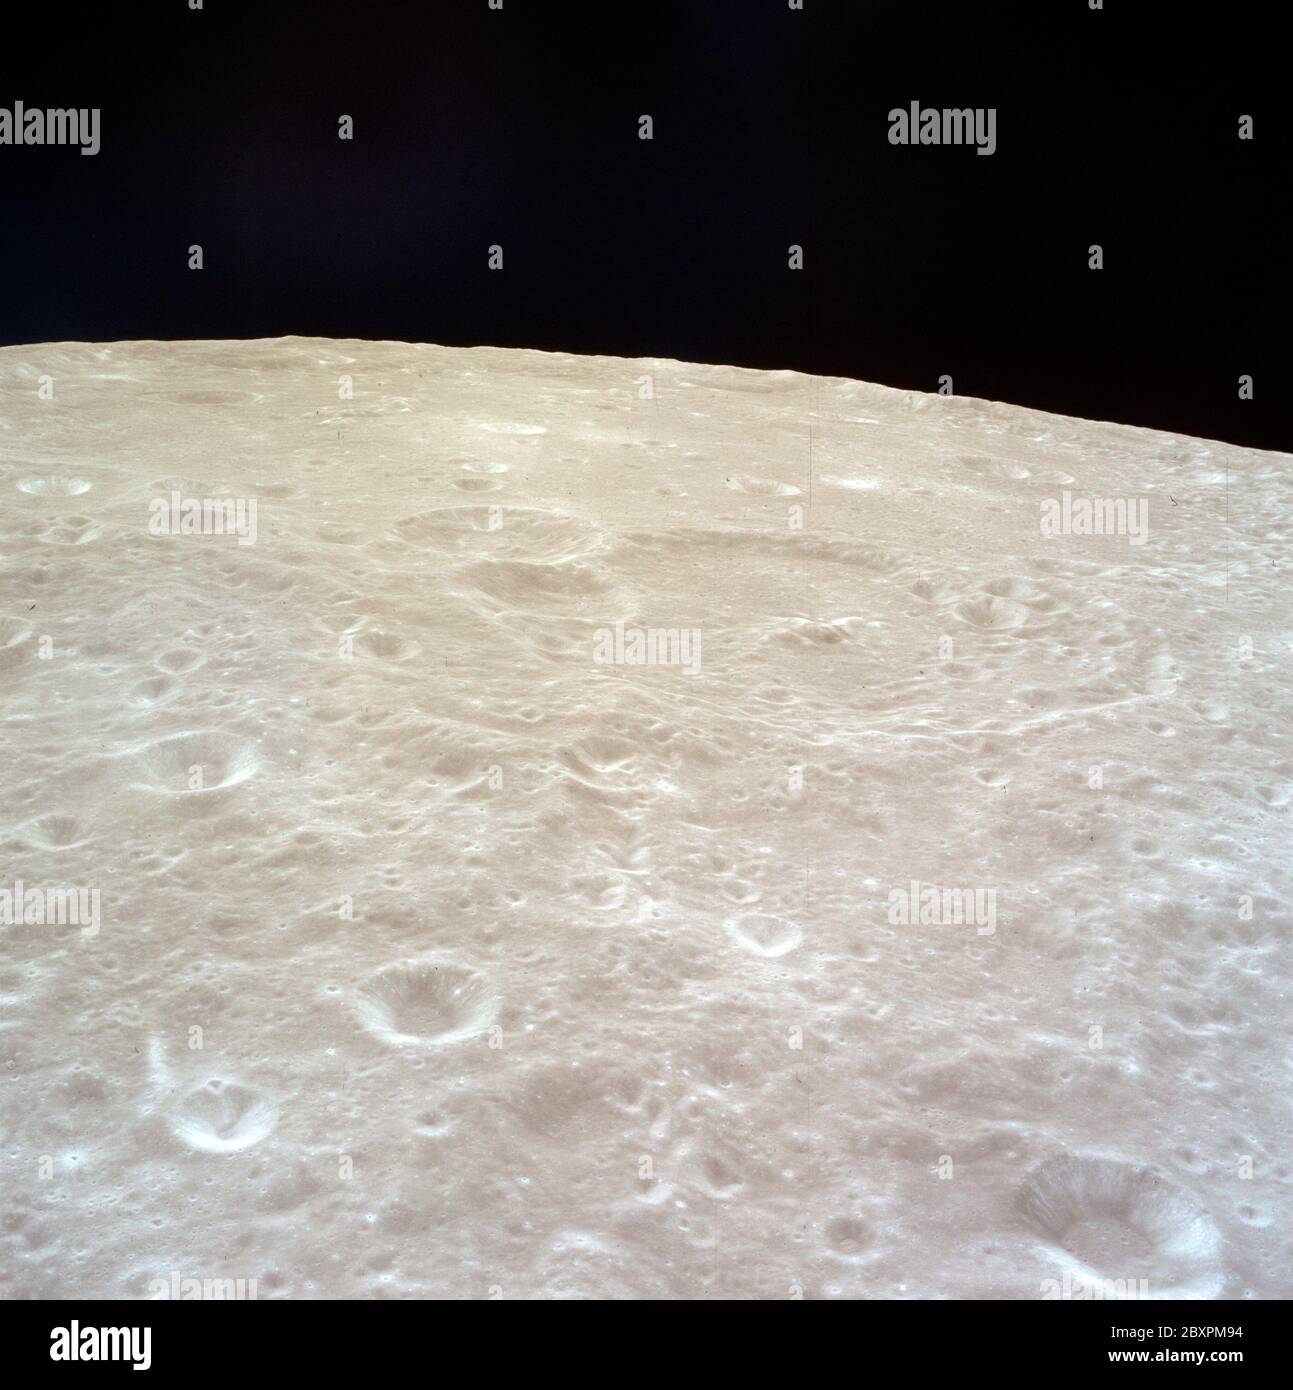 AS11-37-5433 - Apollo 11 - Apollo 11 Mission image - Views of Moon, Crater 218; Scope and content:  The original database describes this as: Description: View of Moon. High oblique view centerd on Crater 218, officially named Schuster. Image taken from inside the Lunar Module (LM) from orbital altitude over the moon during the Apollo 11 Mission. Original film magazine was labeled R.  Film Type:  Ektachrome EF SO 168 Color on a 2.5 mil Estar polyester base, taken with an 80mm lens. Approximatel Photo Scale: 1:3,028,700. Principal Point Latitude 4.0 degrees North, Longitude 146.0 degrees East. S Stock Photo